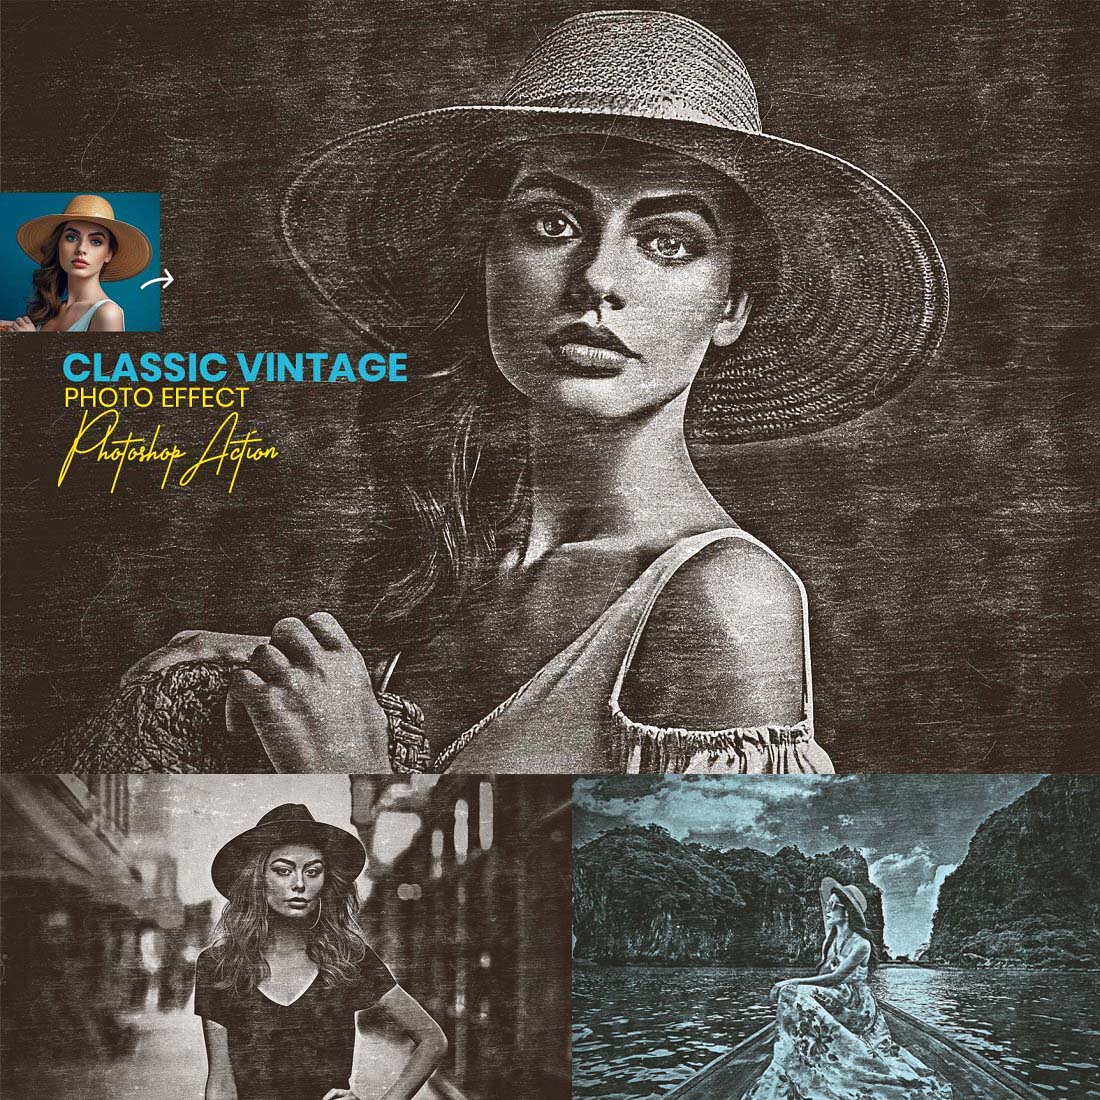 Classic Vintage Photo Effect cover image.